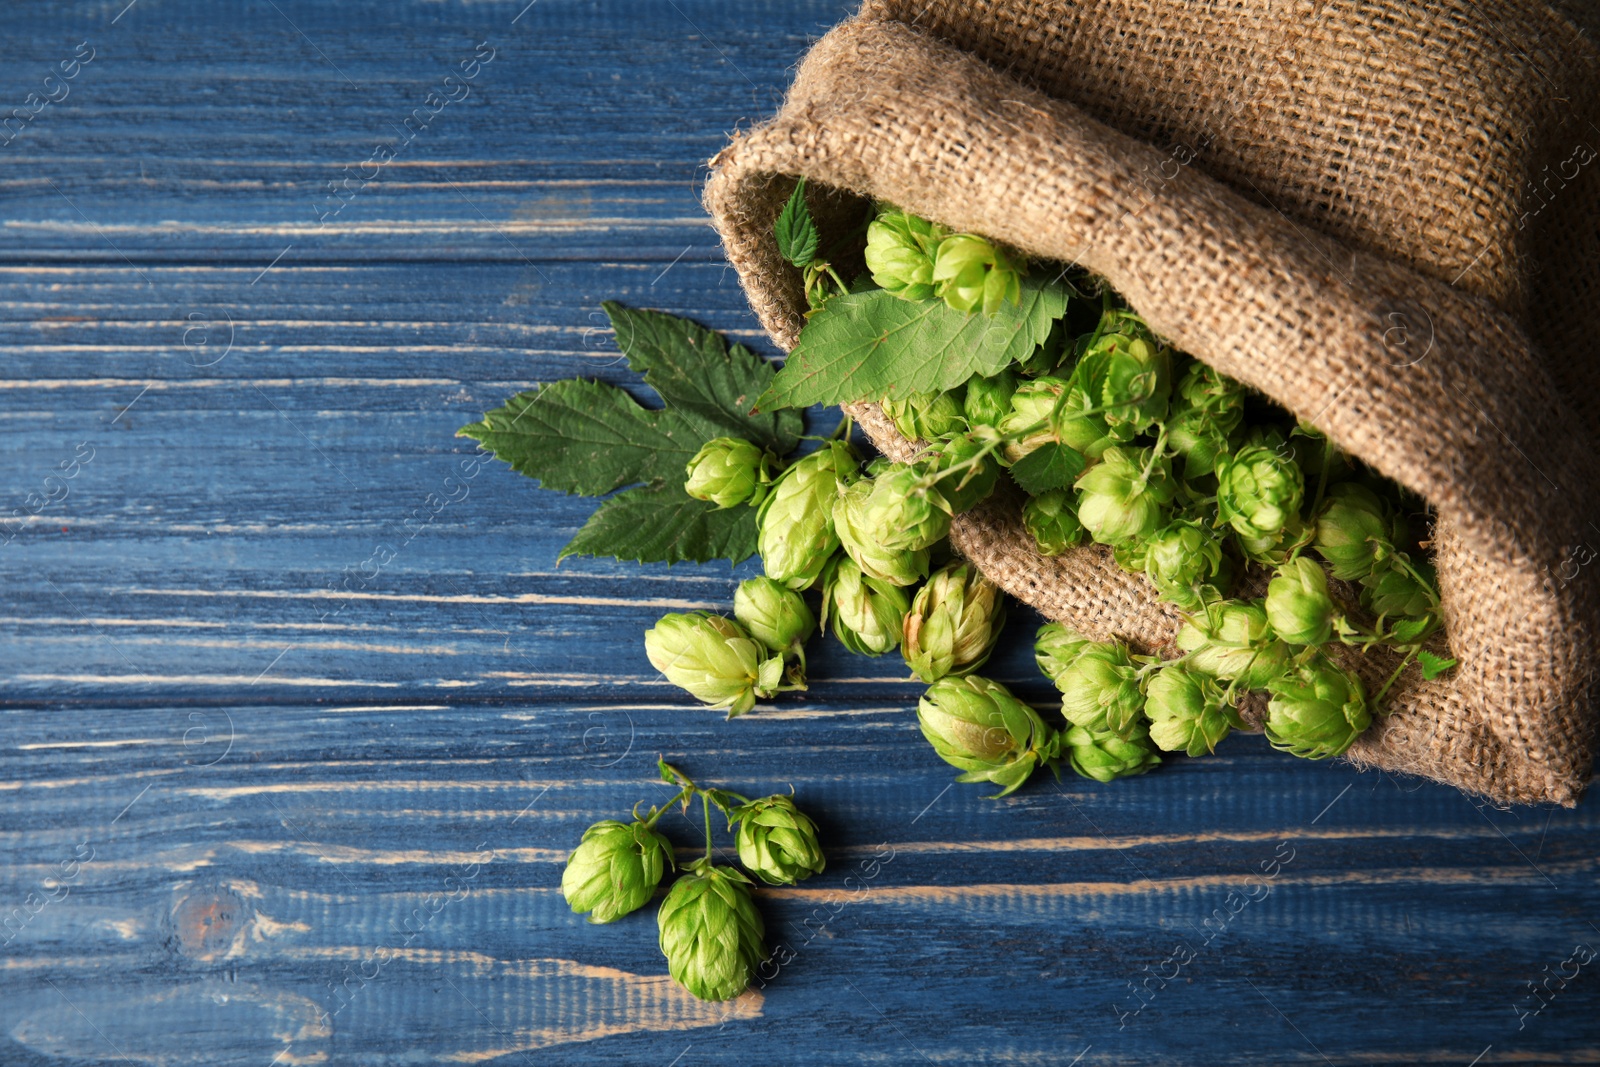 Photo of Sackcloth bag with fresh green hops on wooden background, top view with space for text. Beer production